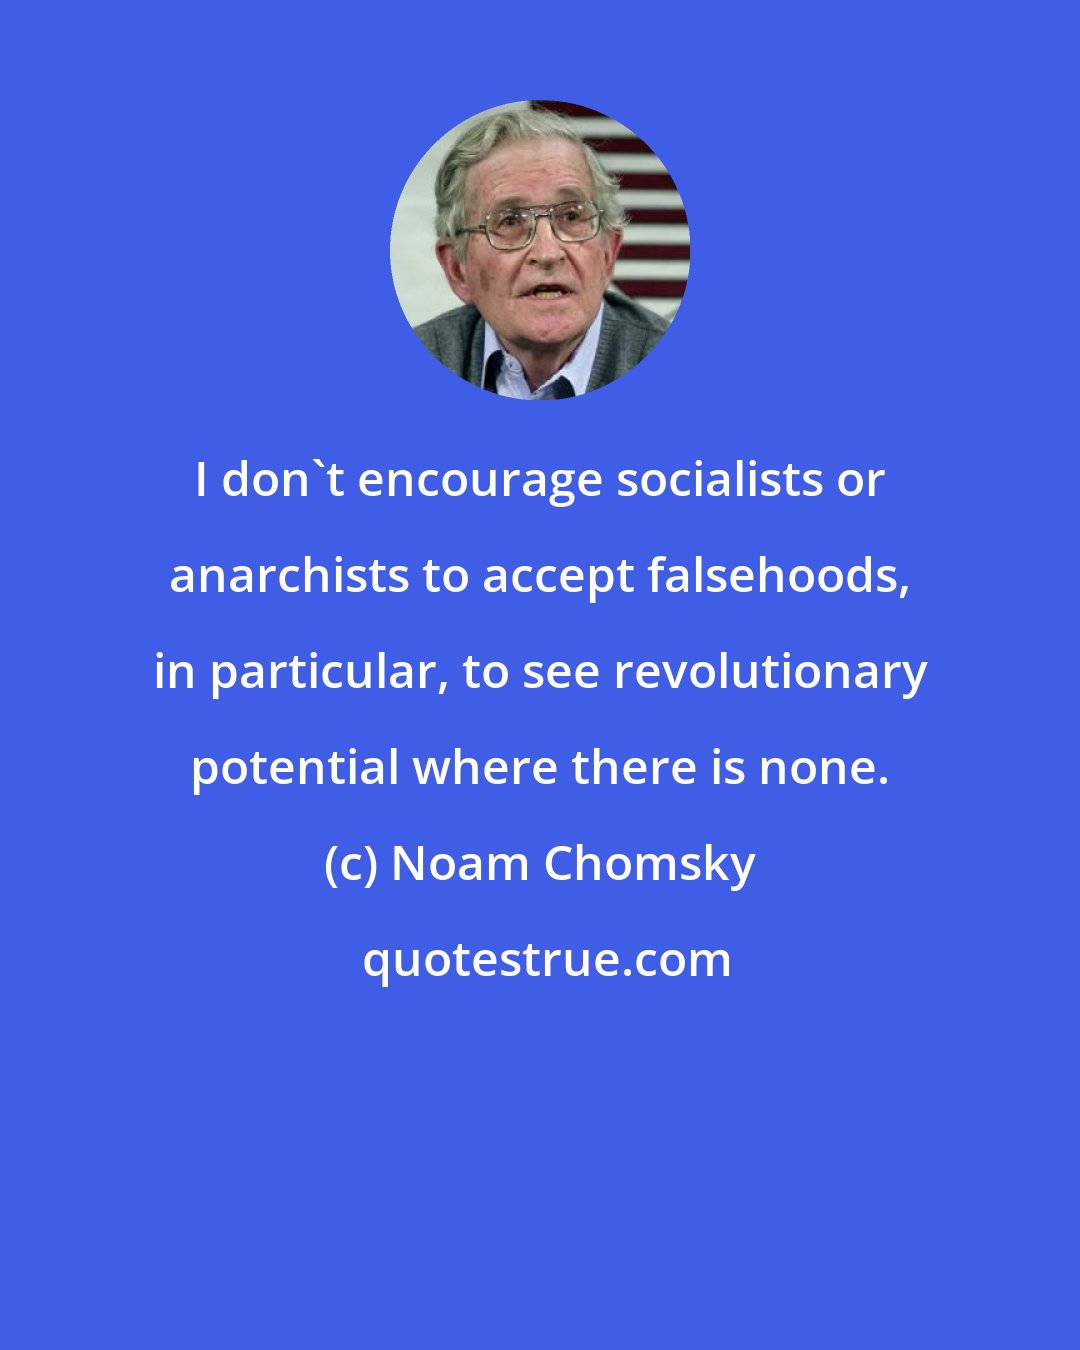 Noam Chomsky: I don't encourage socialists or anarchists to accept falsehoods, in particular, to see revolutionary potential where there is none.